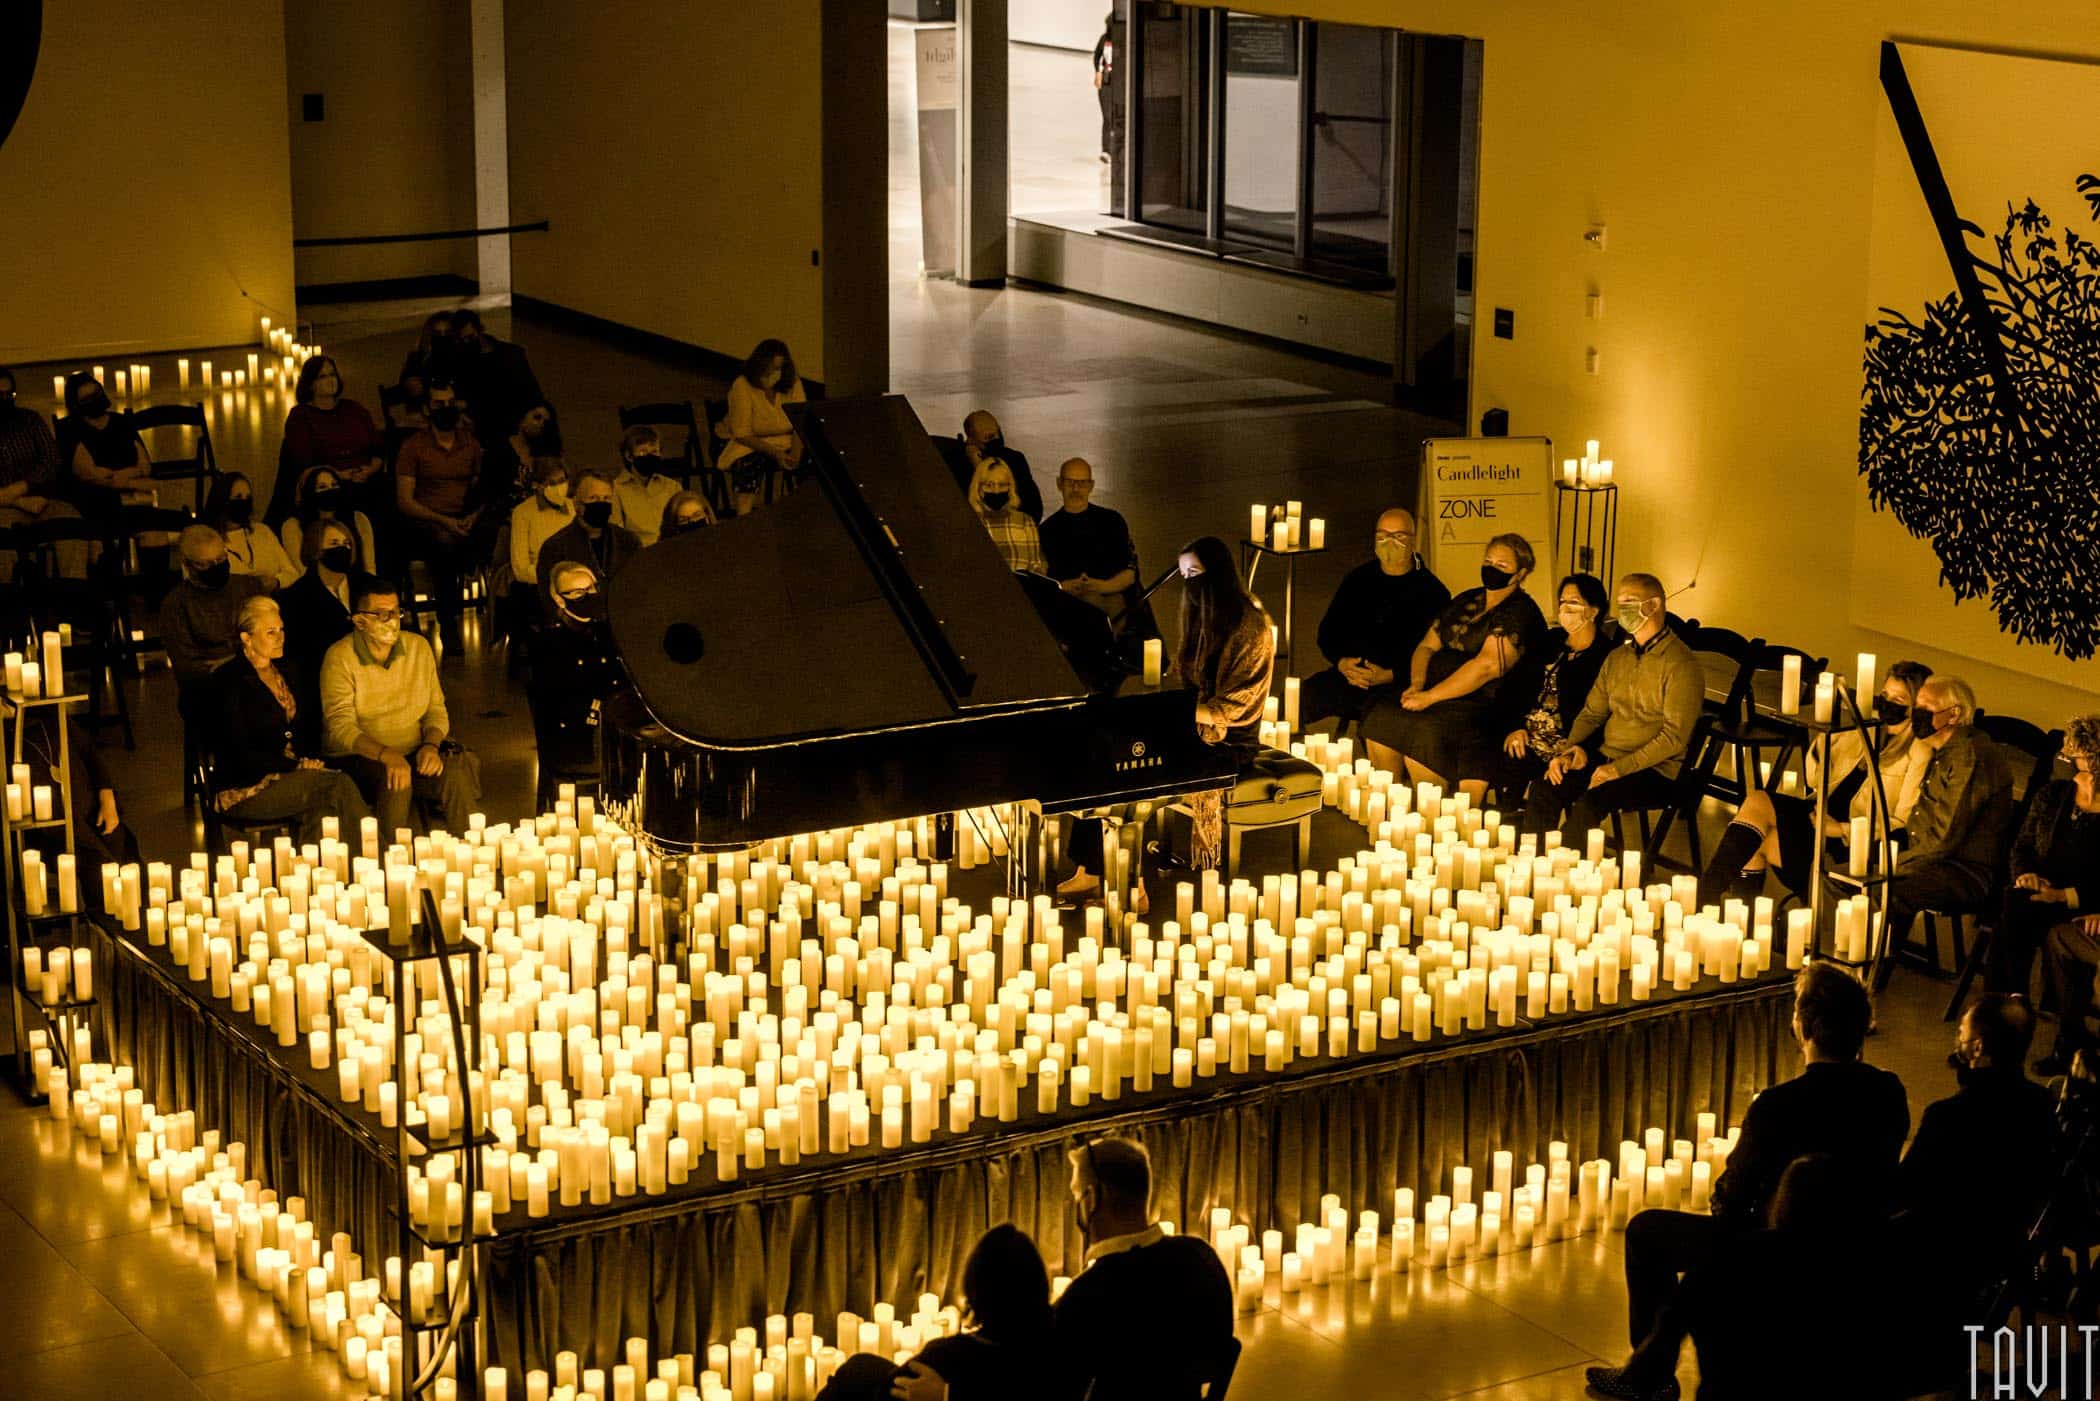 Pianist playing on stage surrounded by candles and audience